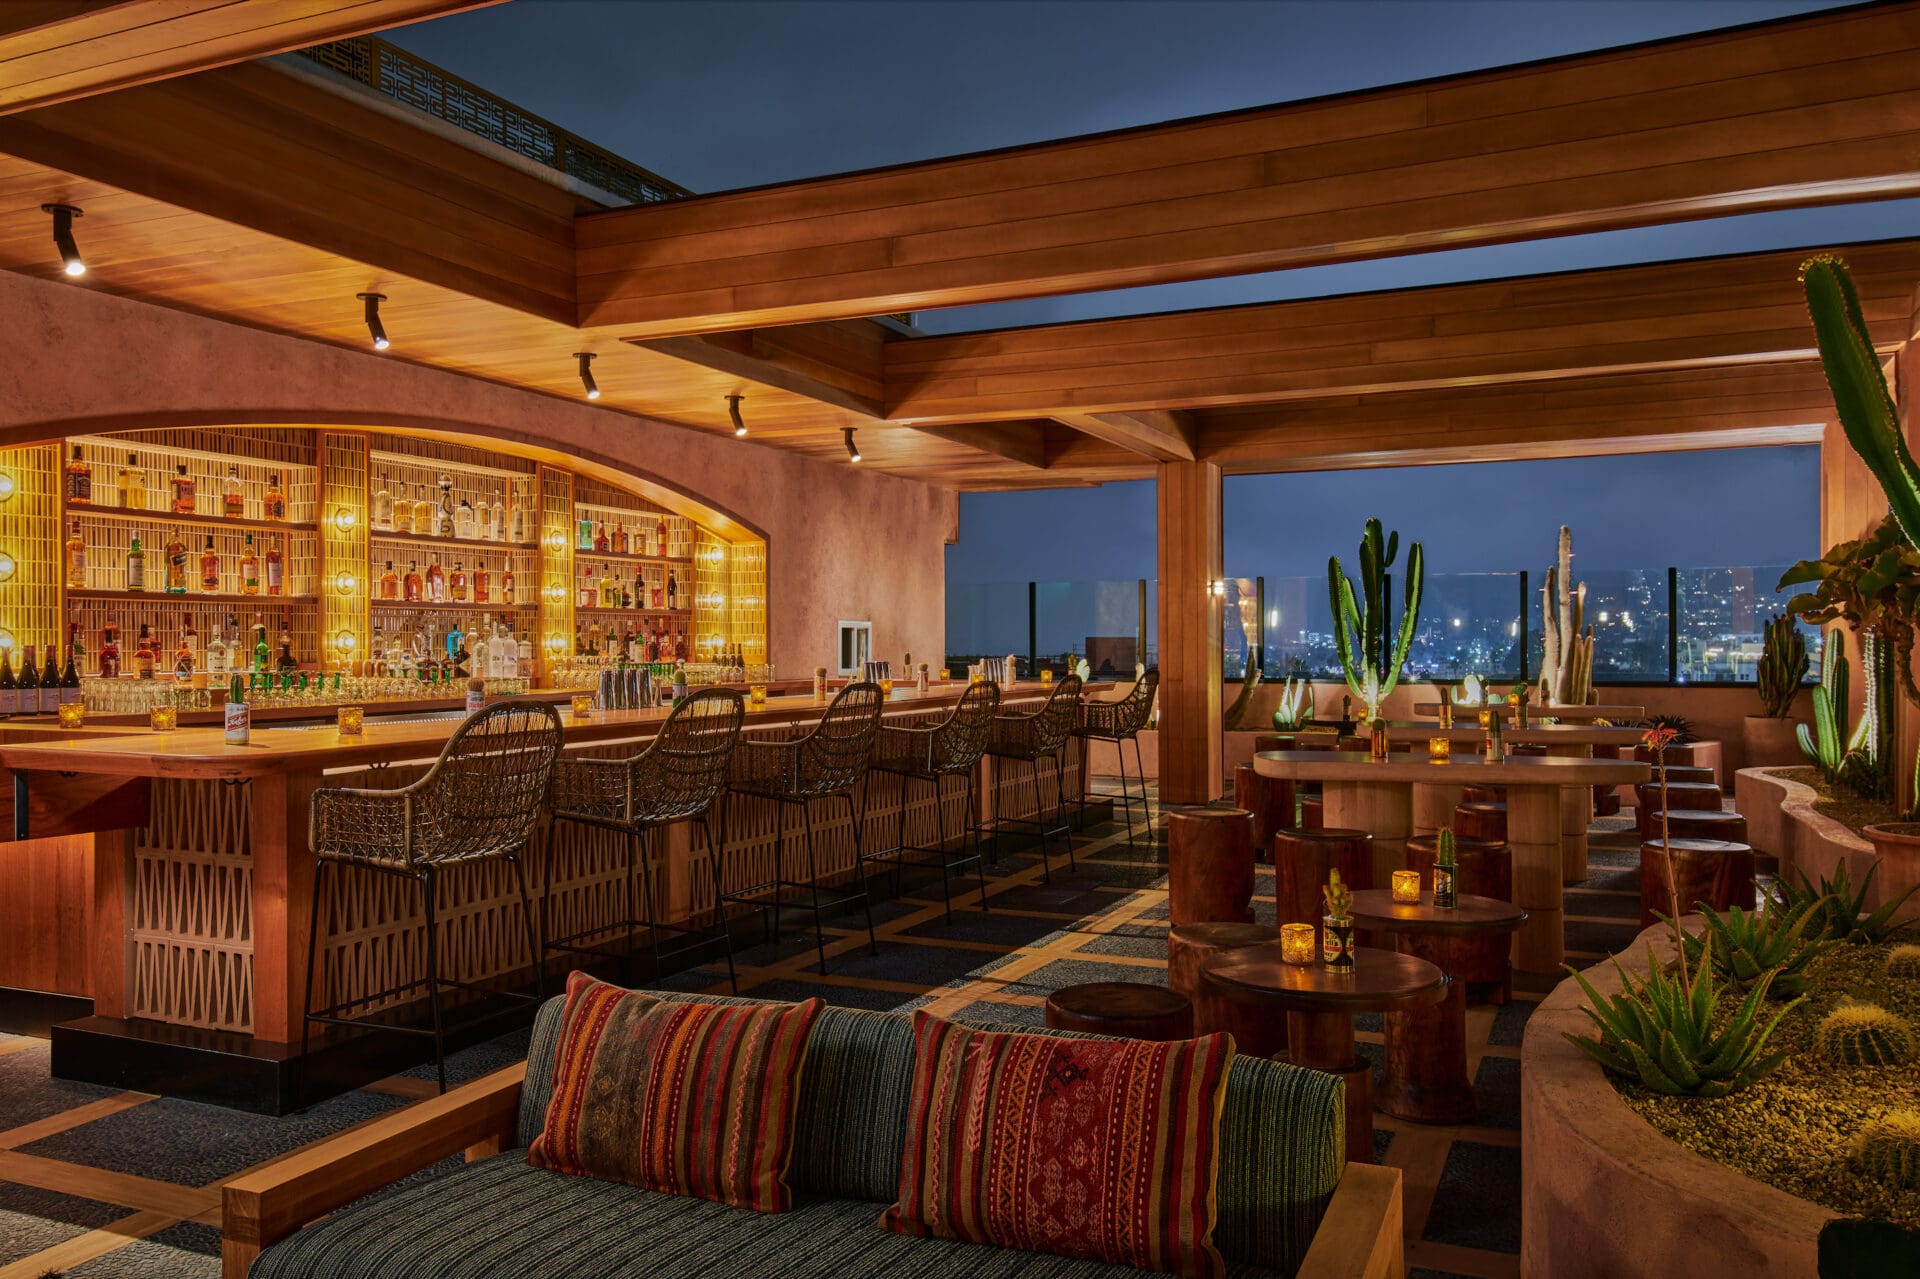 Best rooftop bars LA | The rooftop bar at Desert 5 Spot at night, with wooden tables under wooden beams silhouetted against a dark-blue sky